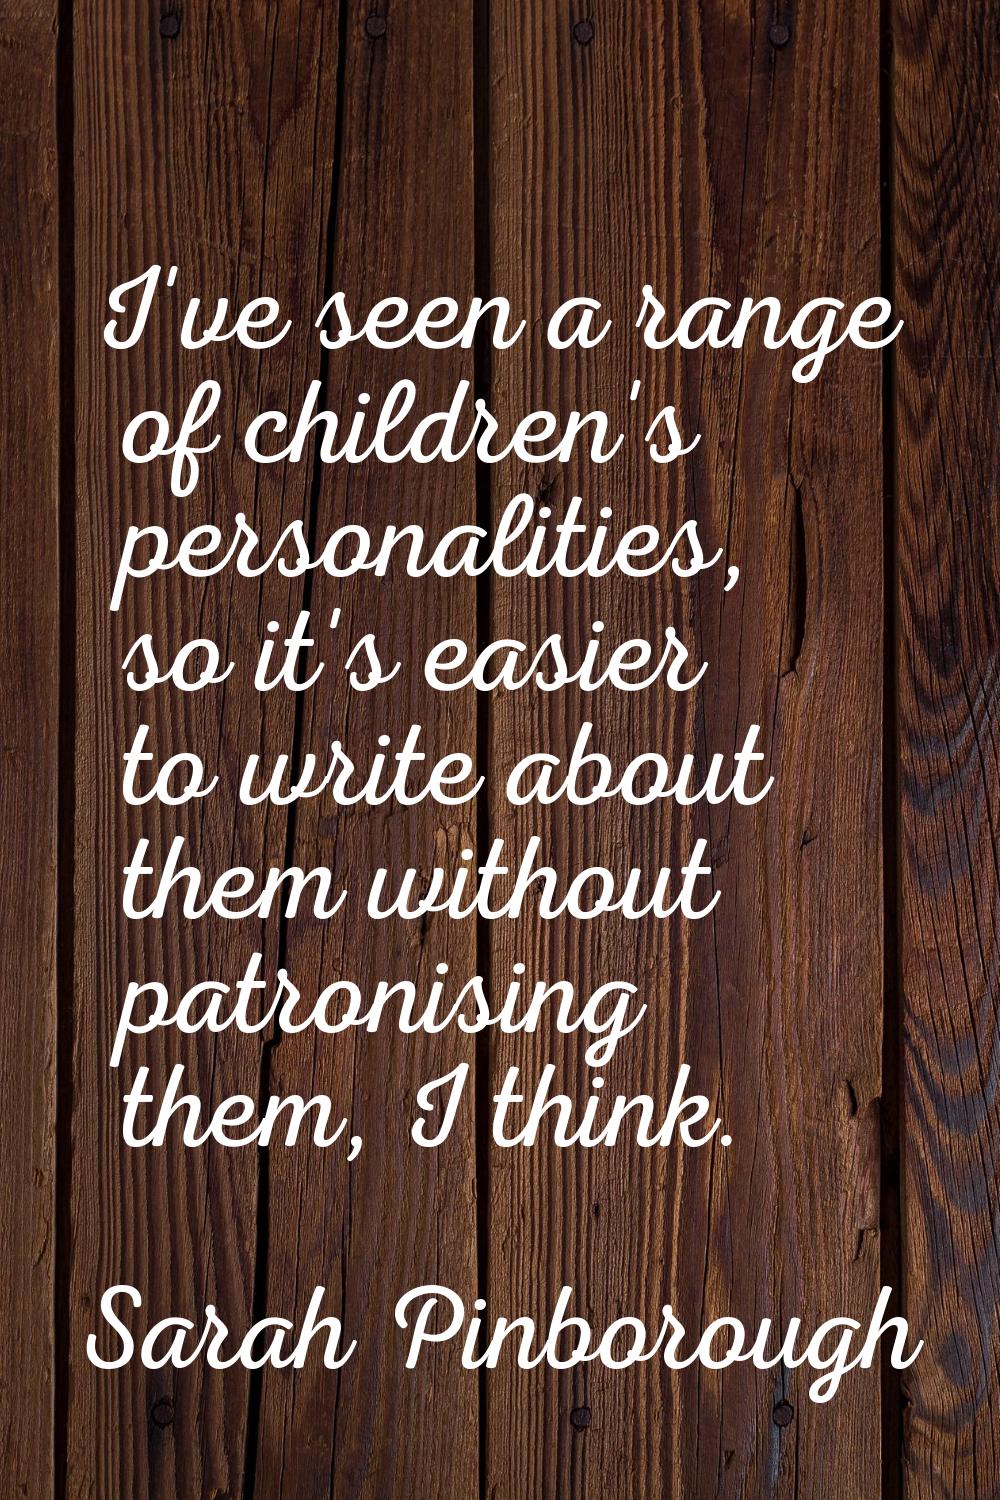 I've seen a range of children's personalities, so it's easier to write about them without patronisi